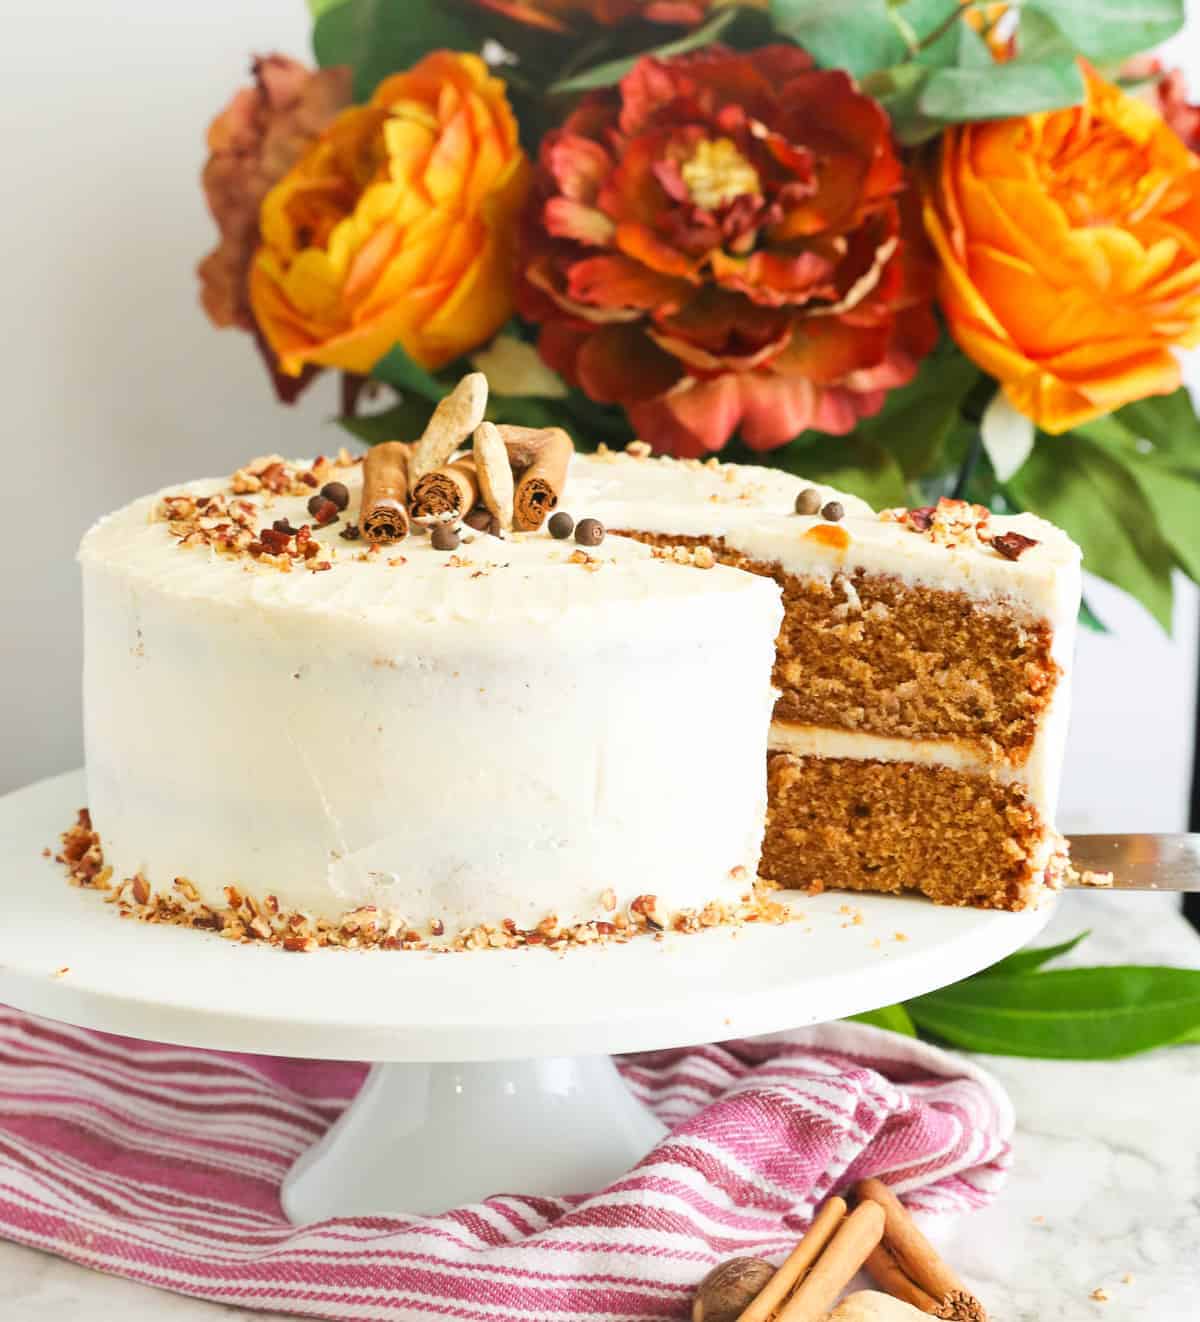 Spice cake sliced for a great Southern dessert